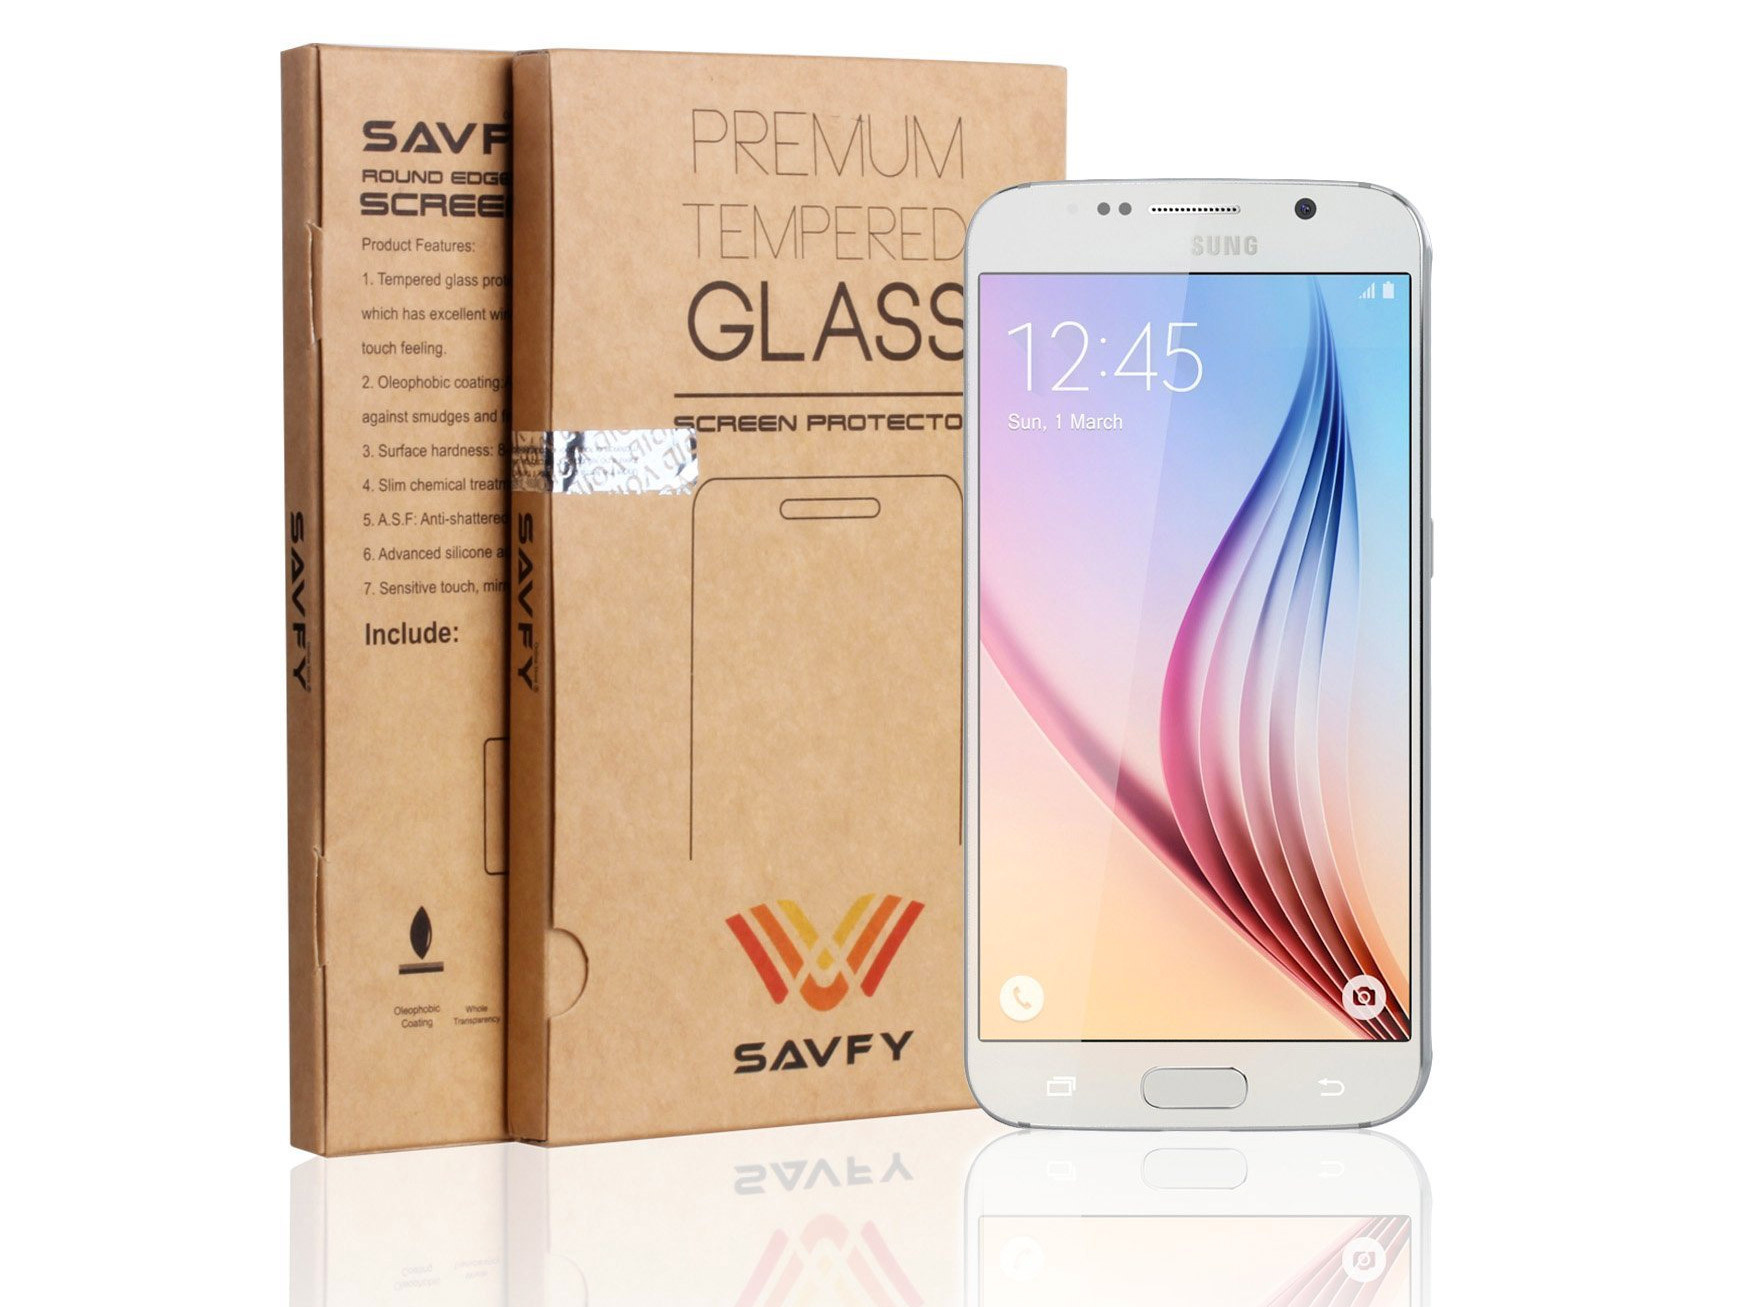 Savfy tempered glass screen protector (£4)